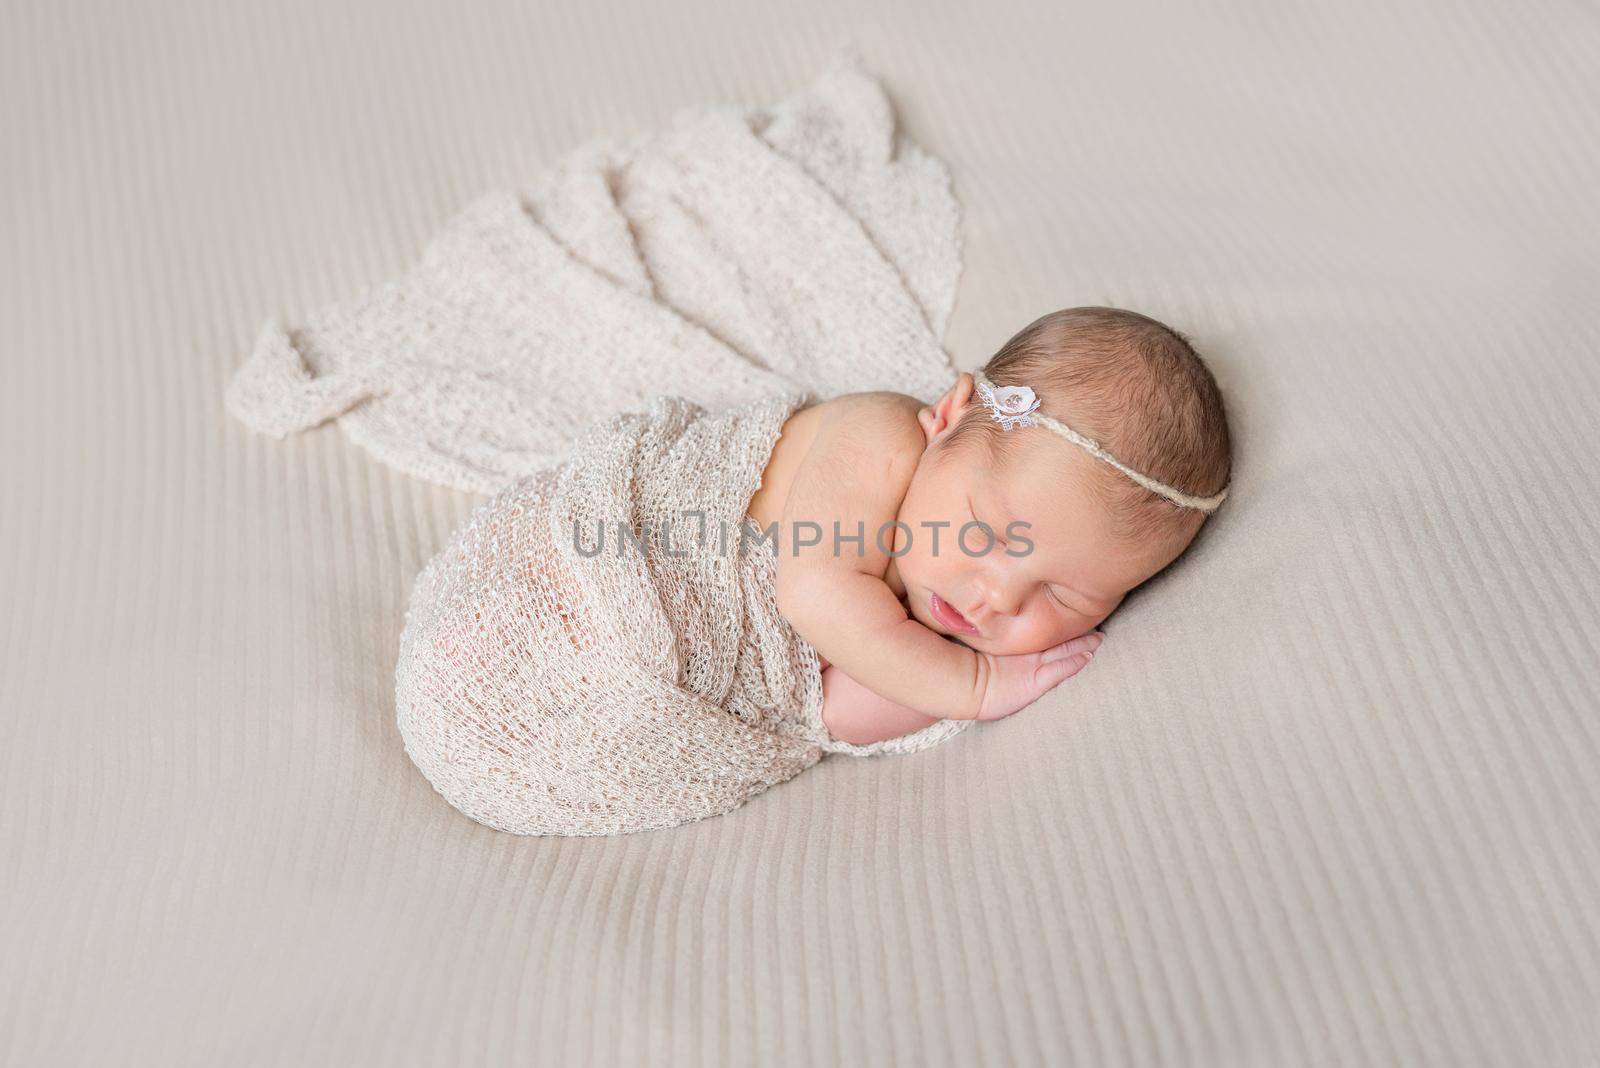 lovely smiling sleeping infant wrapped in gray warm diaper